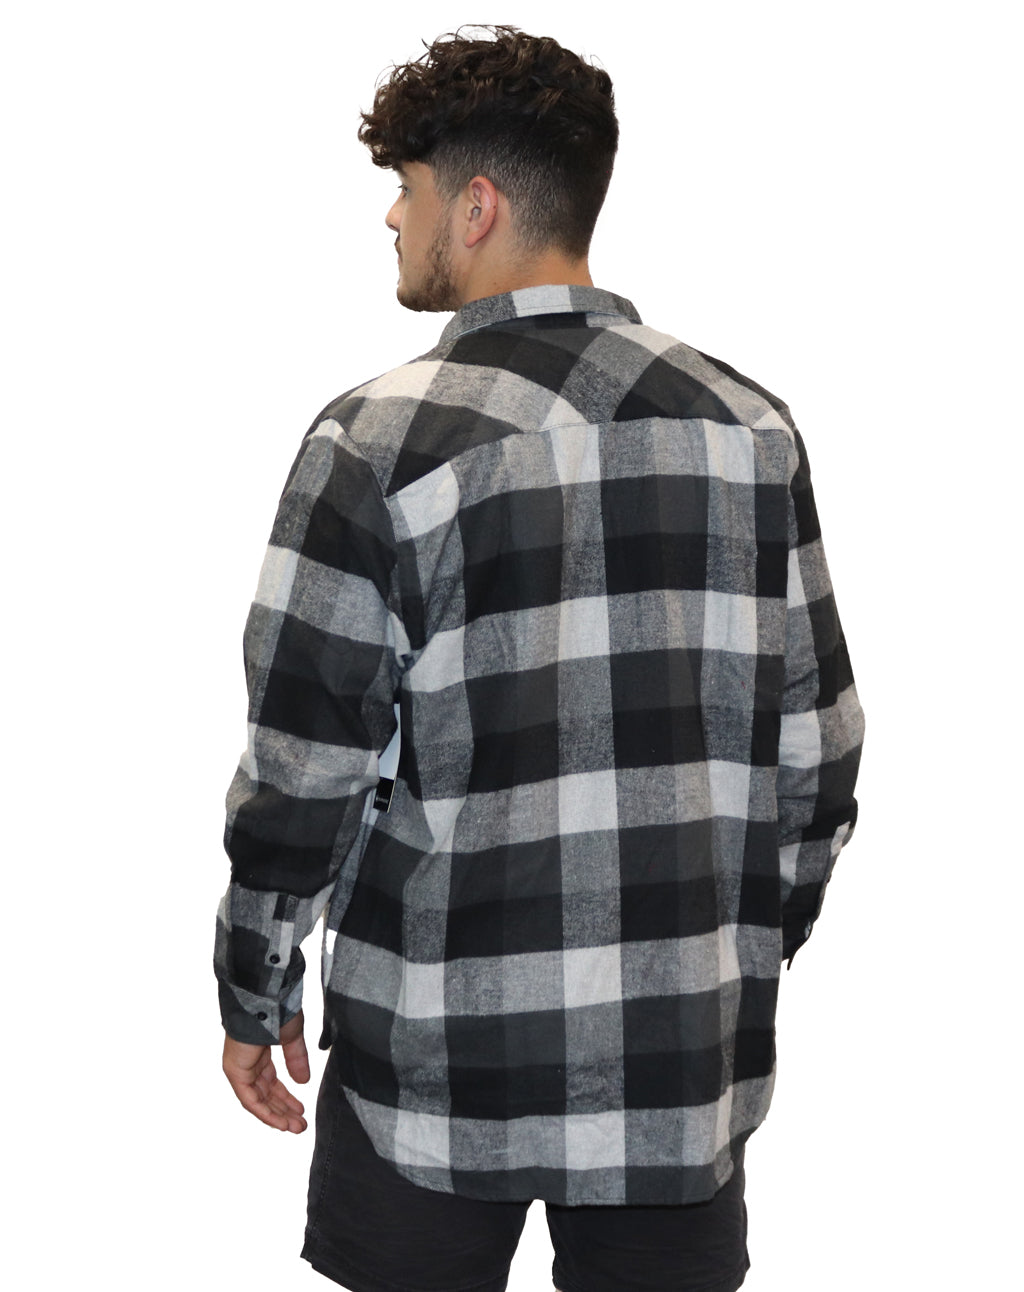 Gray,black and white button up plaid flannel with buttoned pockets on left and right chest and a black and white OC logo on the upper left chest.